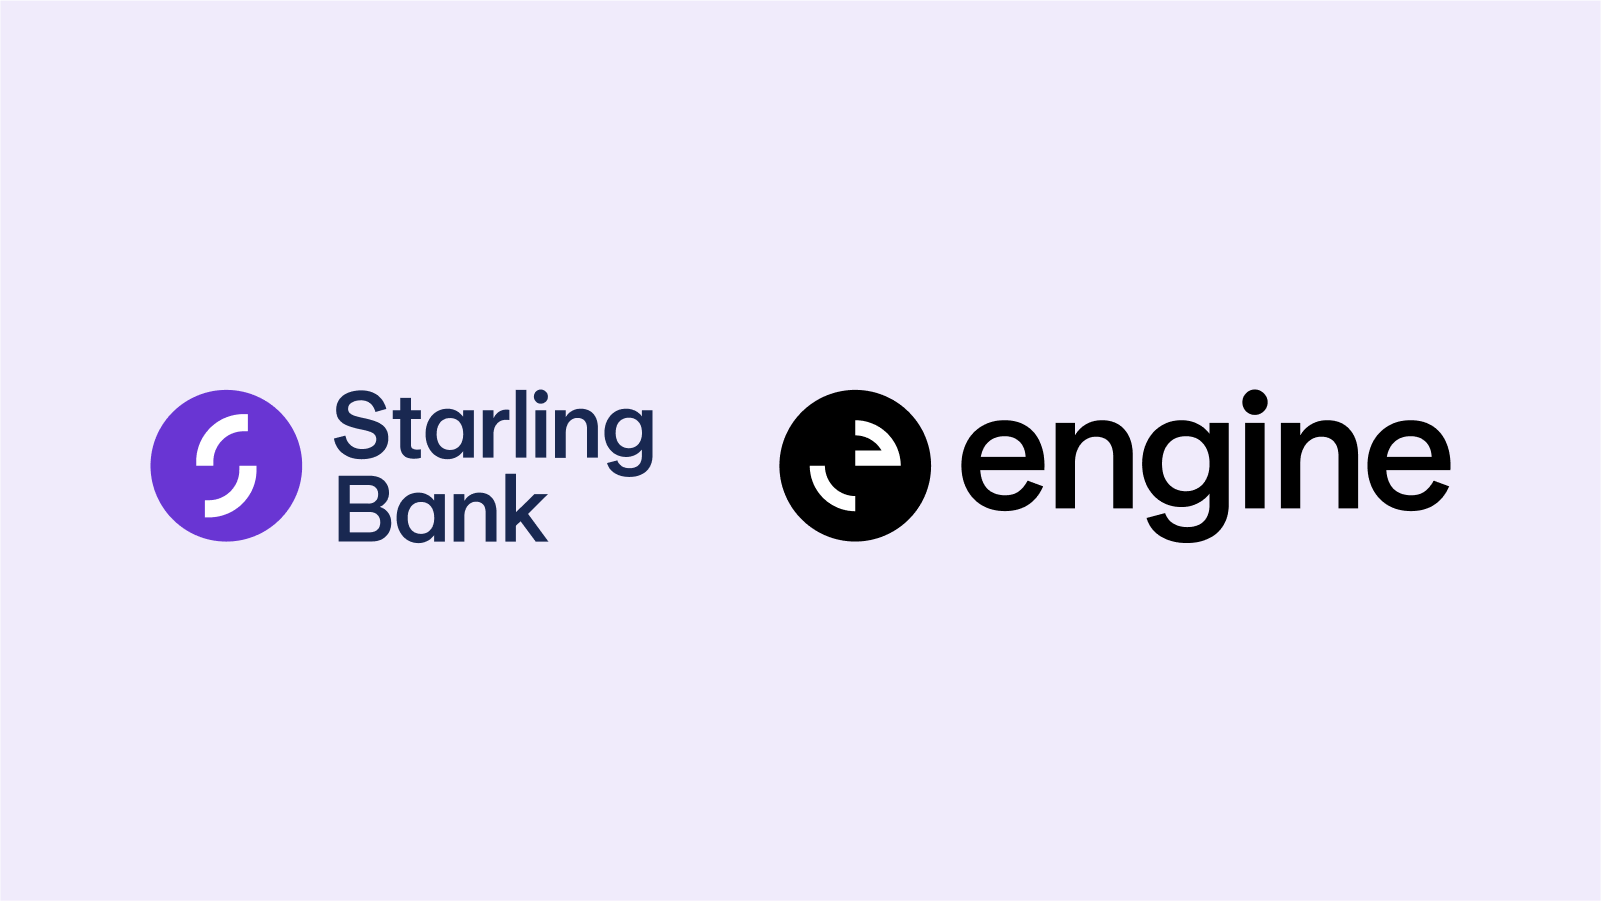 Starling Group achieves third year of profitability